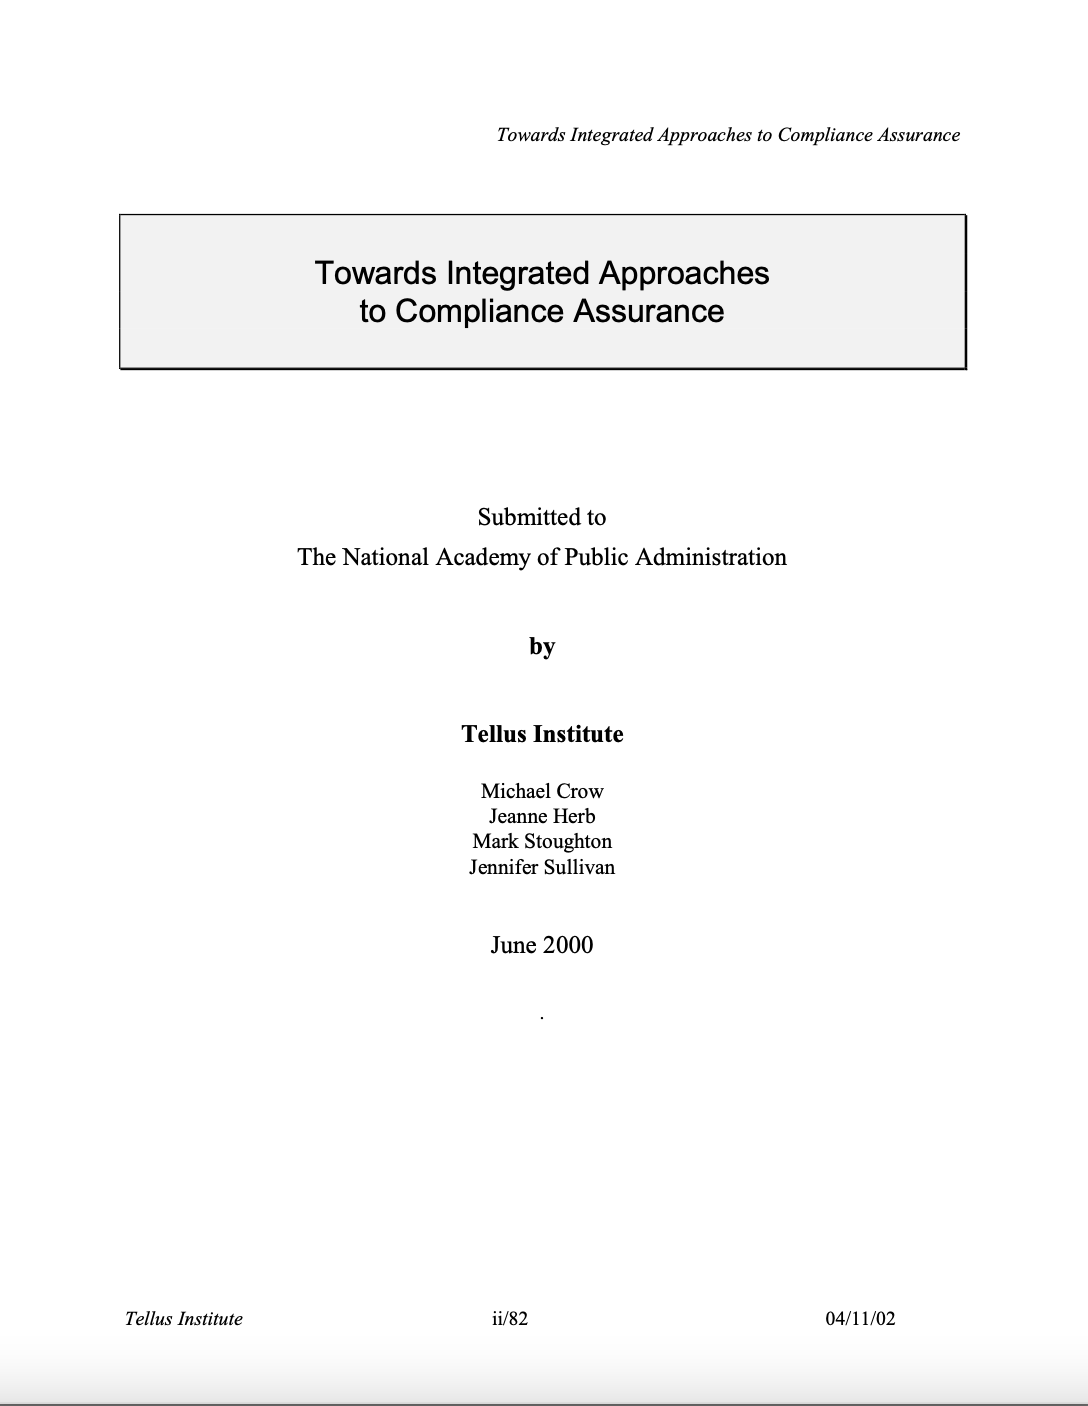 Towards Integrated Approaches to Compliance Assurance